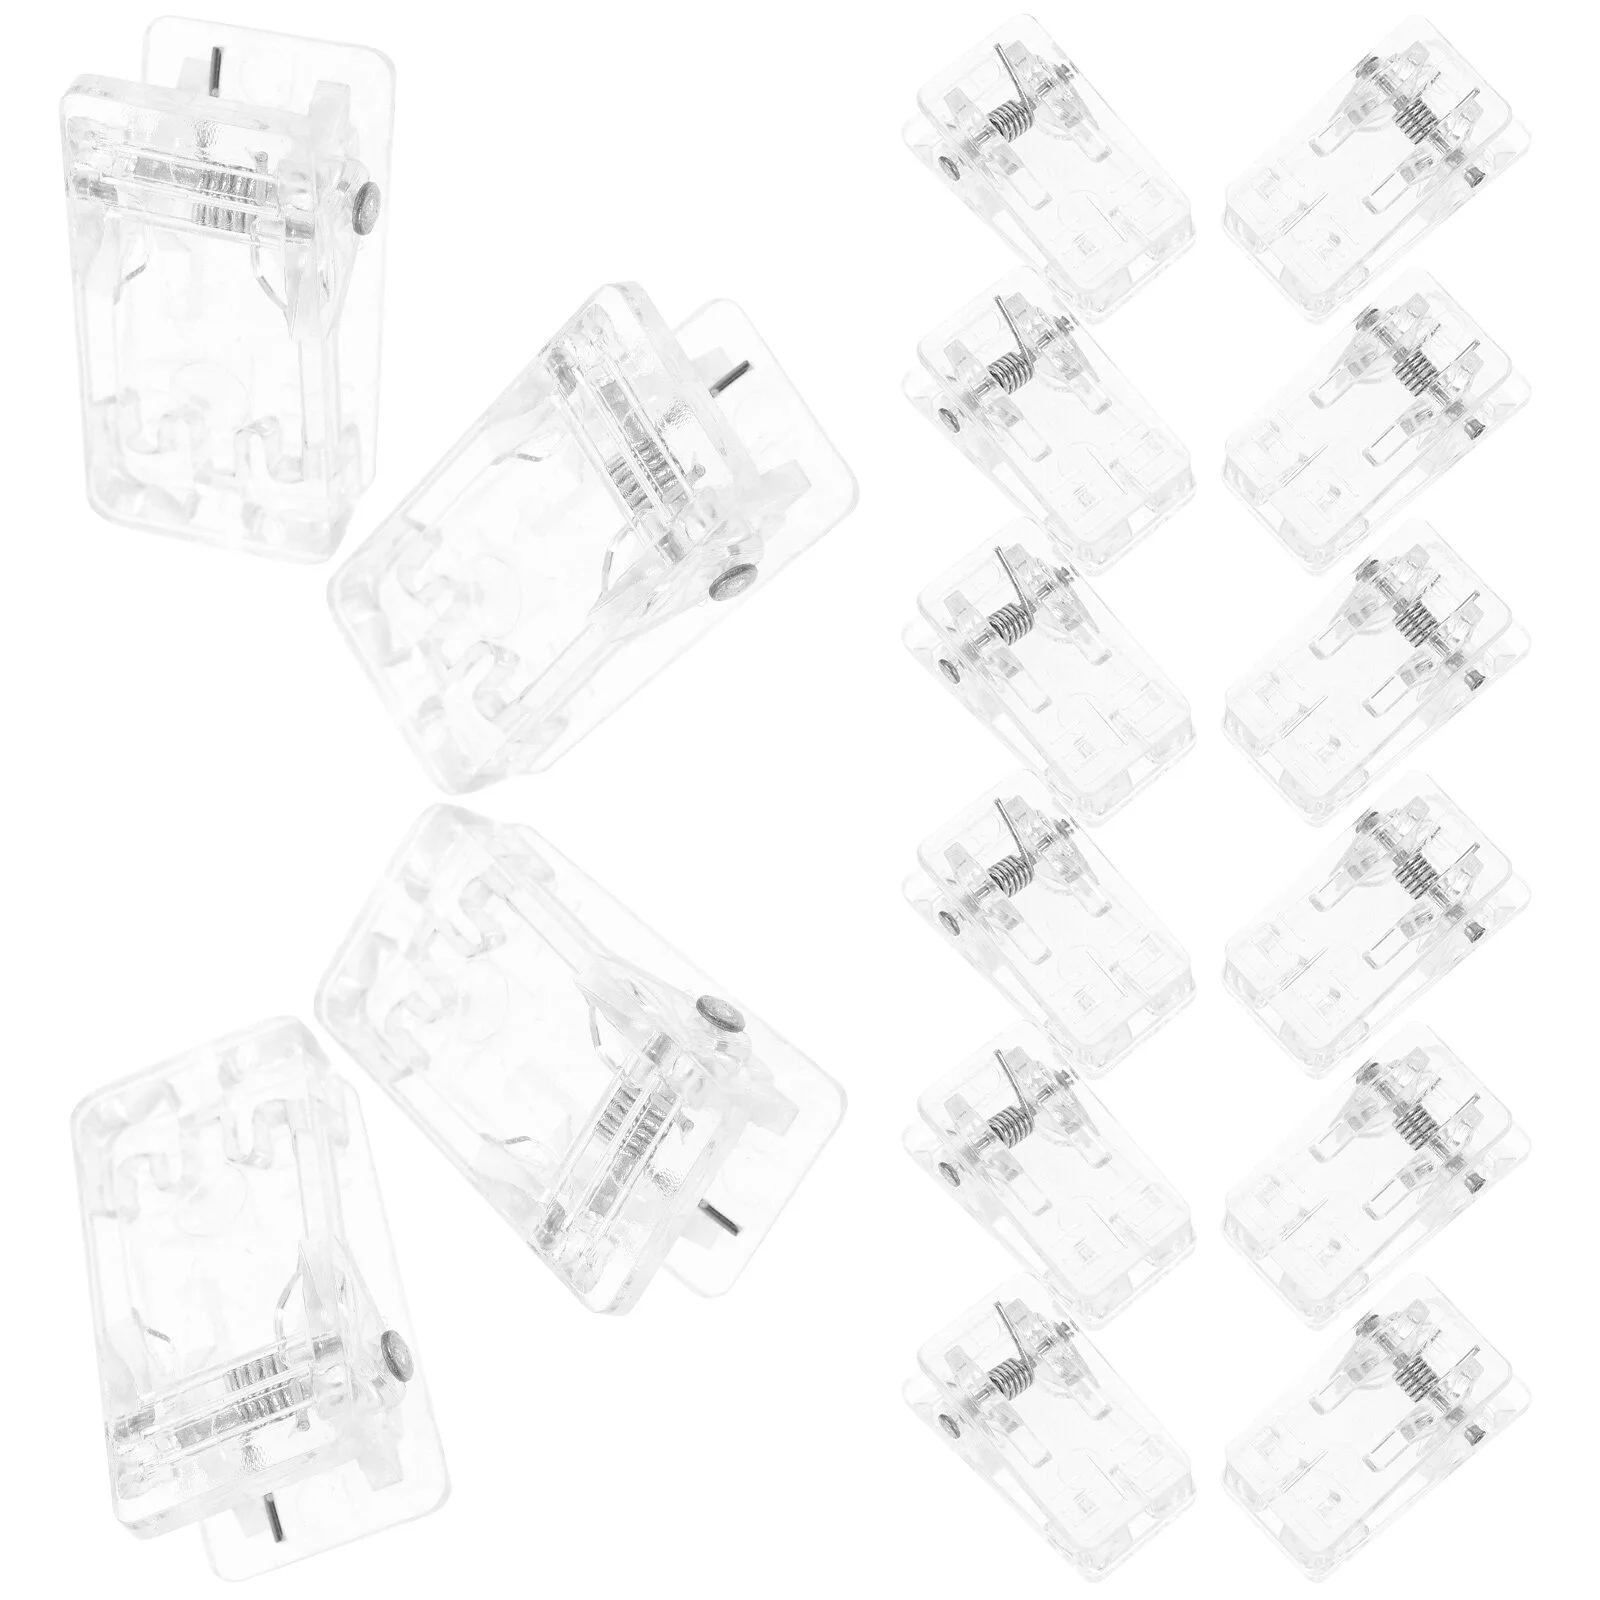 

50 Pcs Label Folder Plastic Card Holder Pp Wall Clips Hanging Small Clear Plastic Folders Badge Metal Holders File Collection